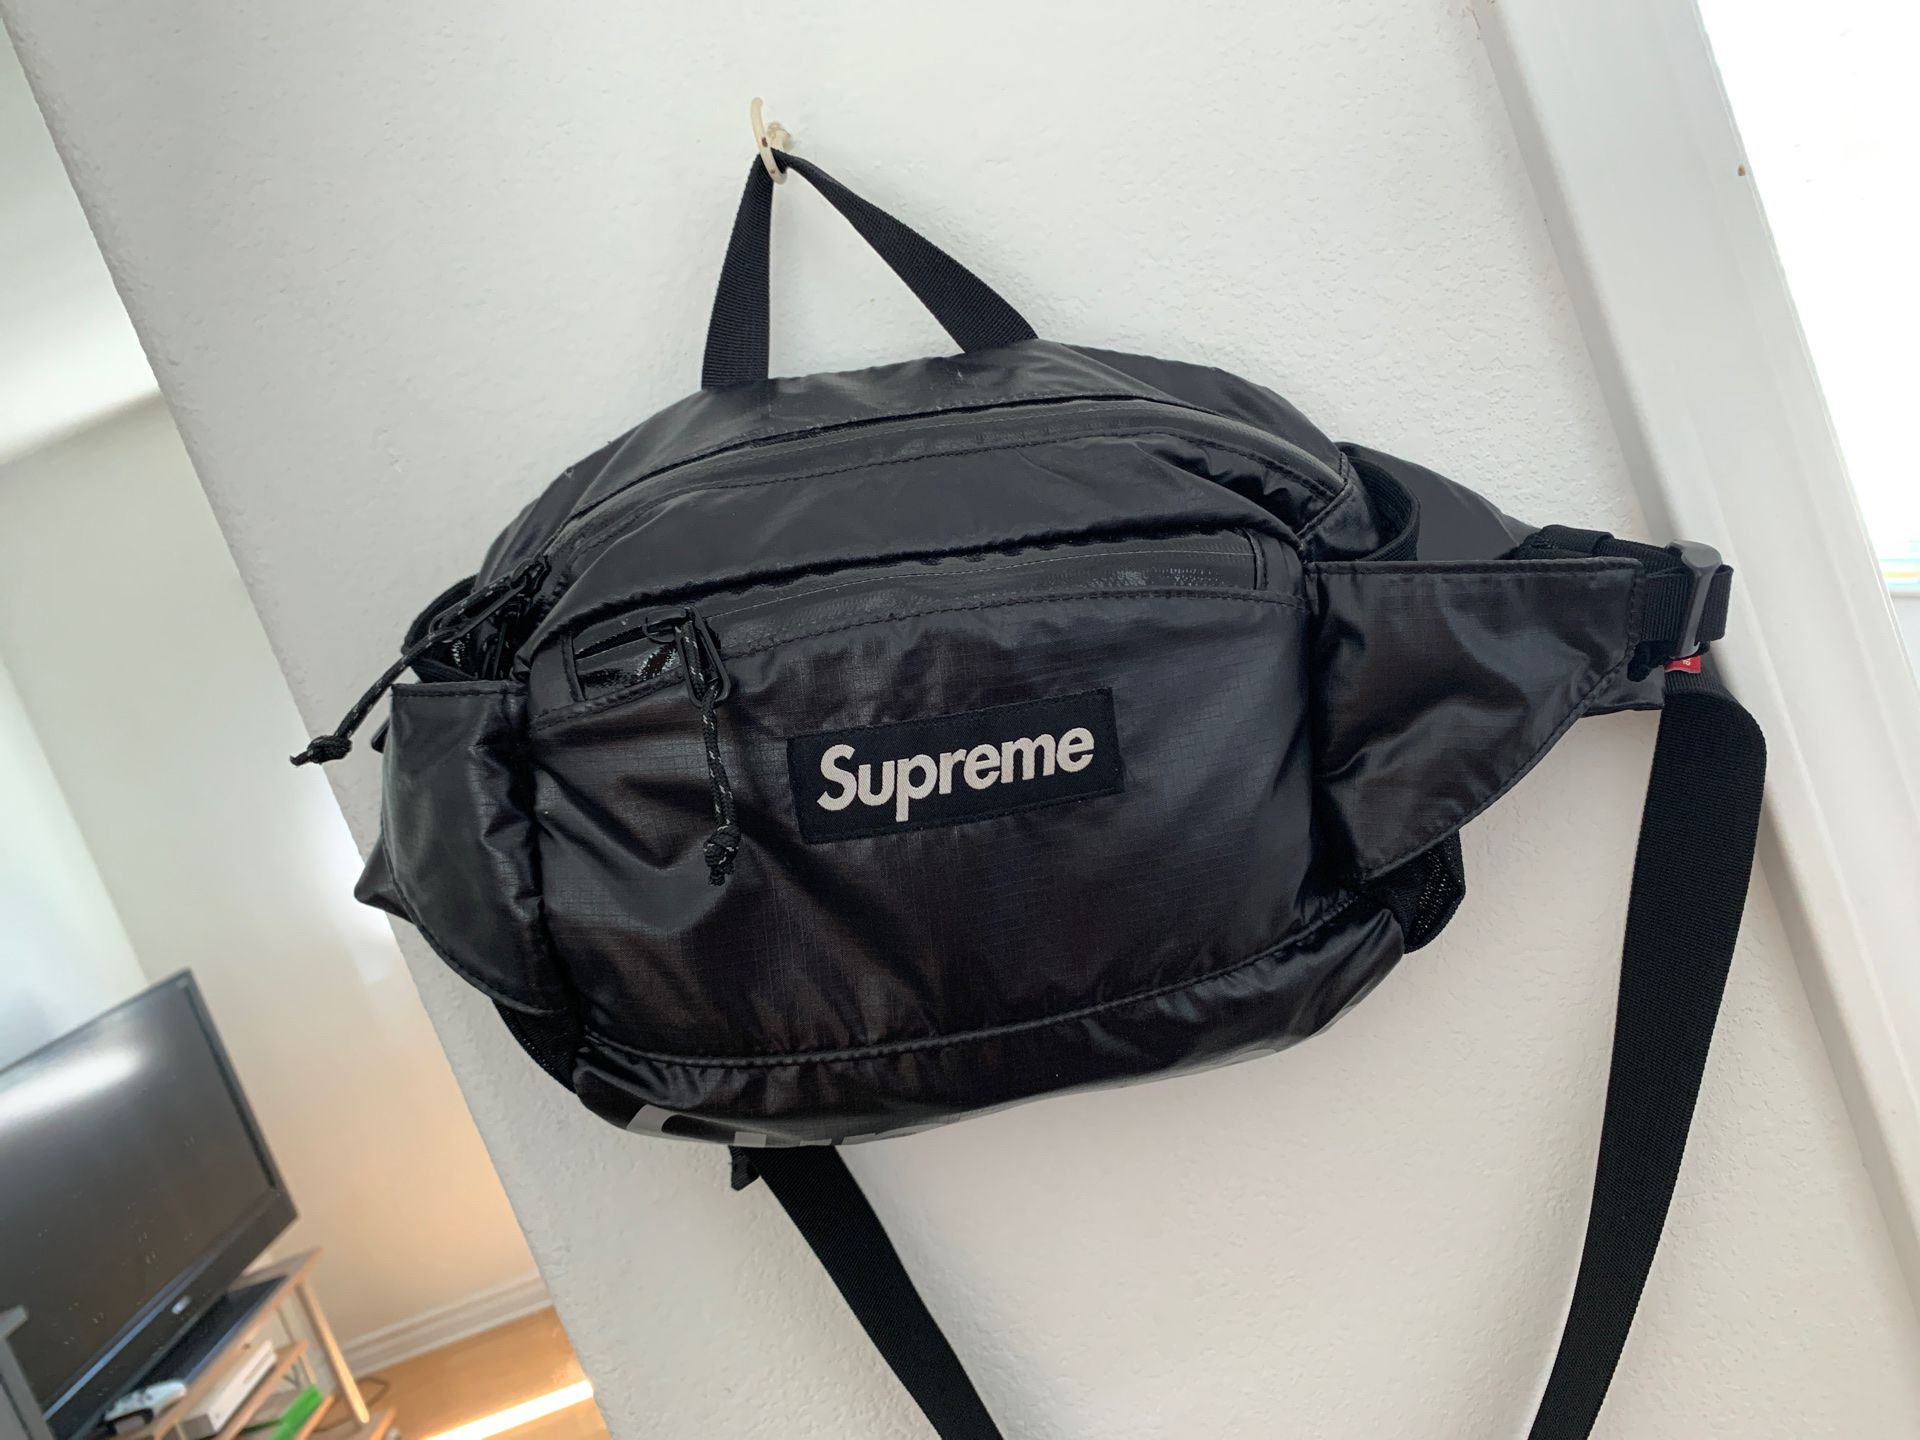 SUPREME FW 17 FANNY PACK